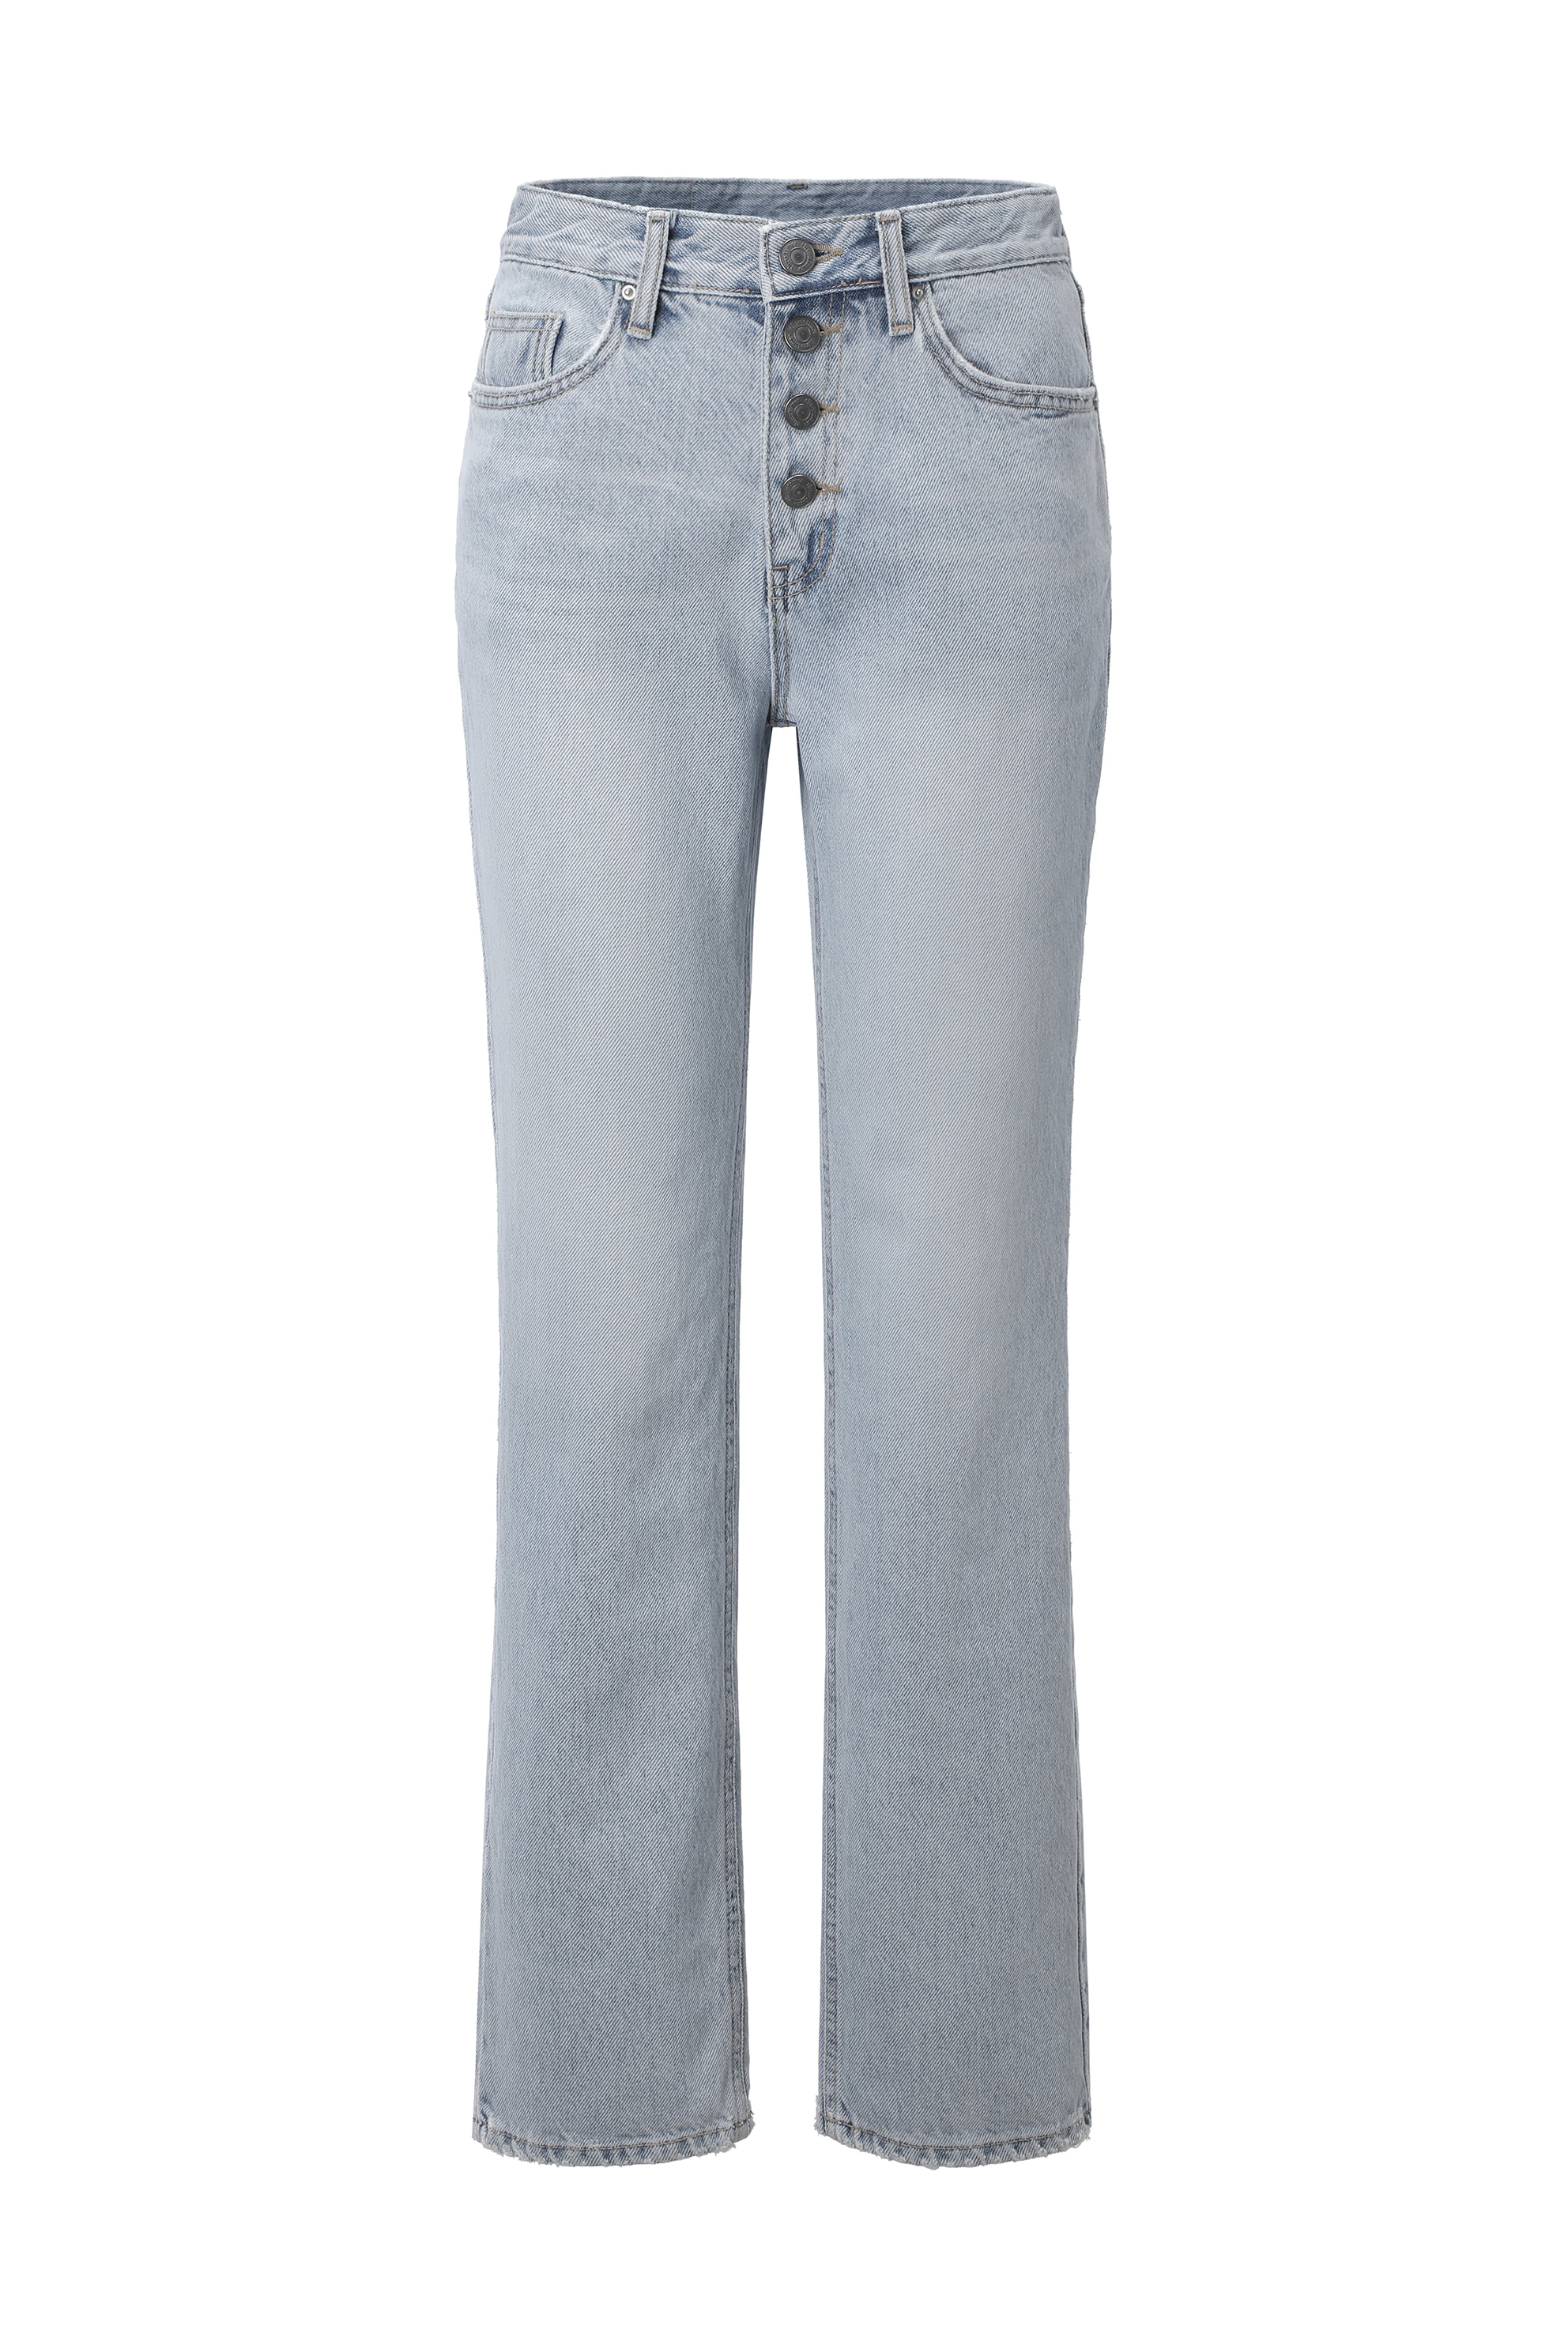 5529 Button straight jeans